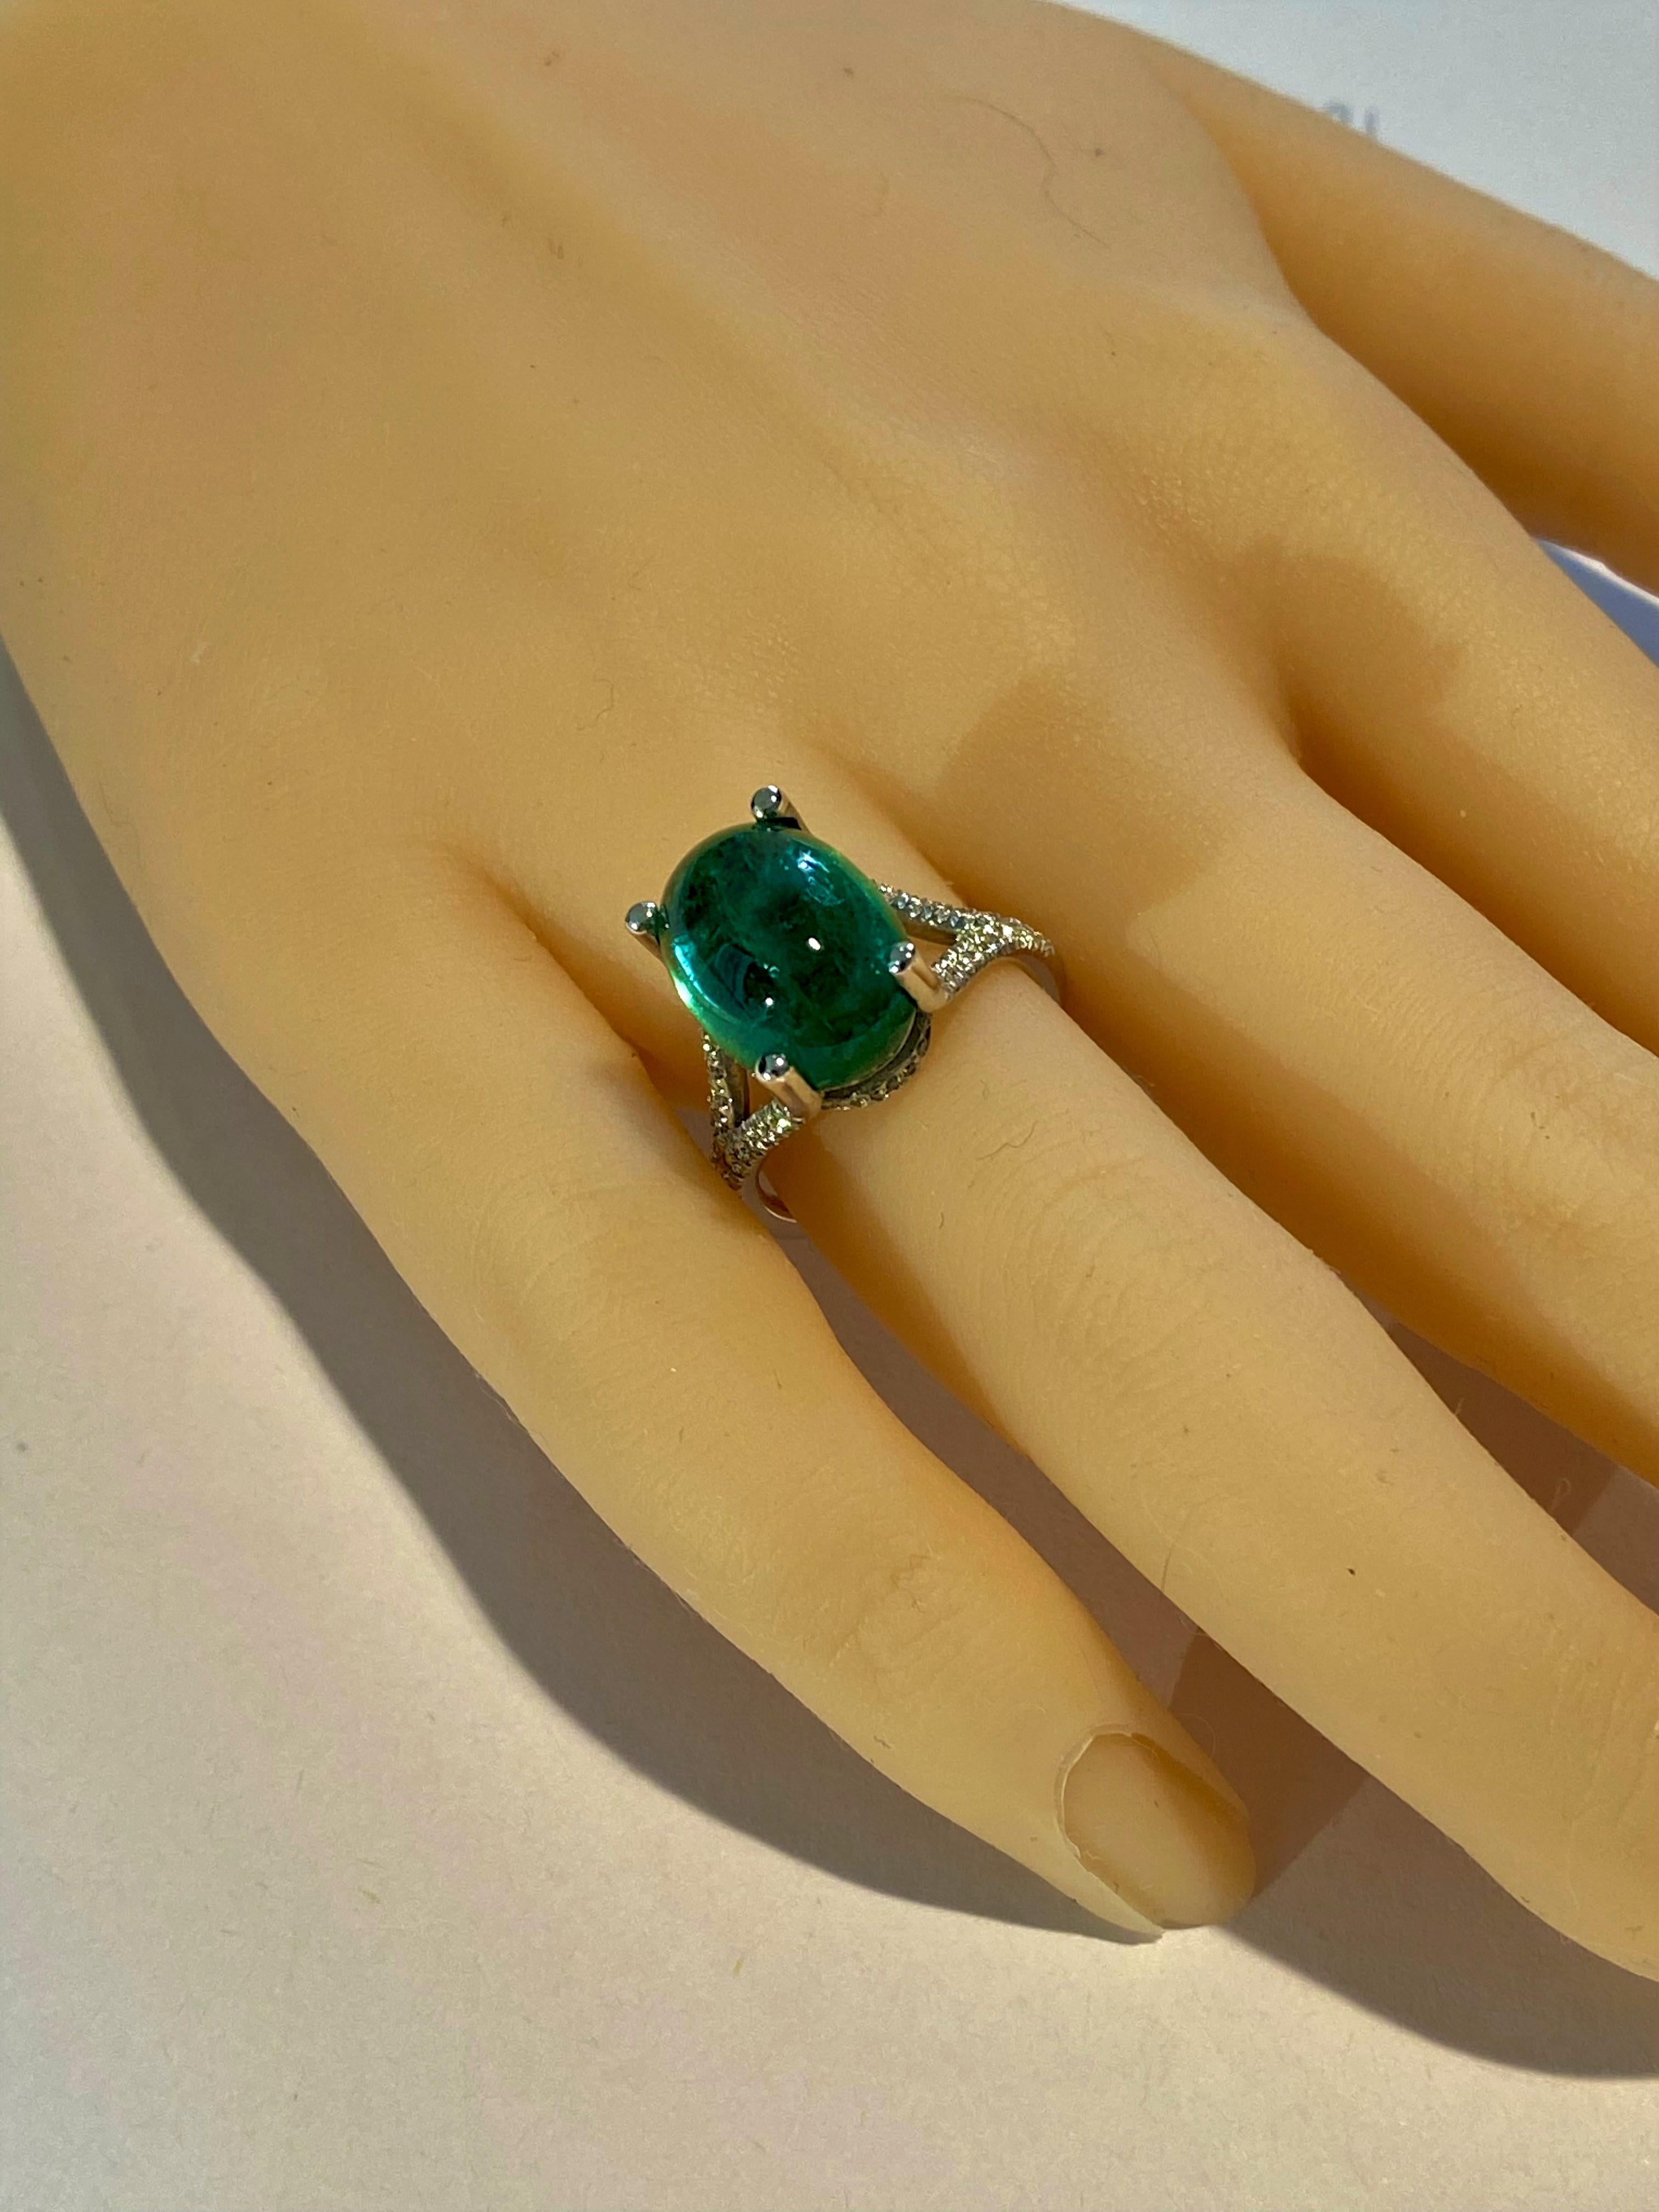 Cabochon Colombia Emerald Diamond Cluster Gold Ring Weighing 11.05 Carat 2